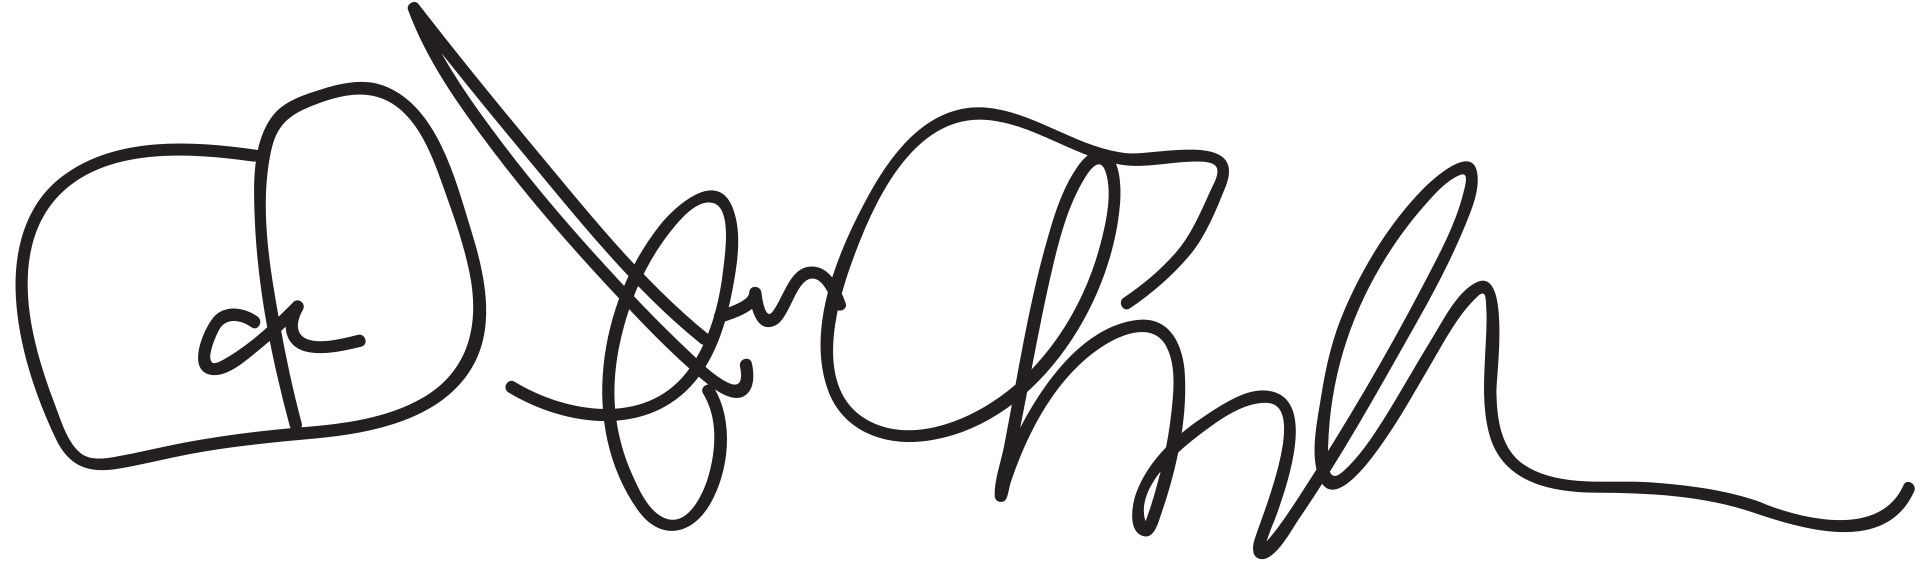 official signature of celebrity Dave Chappelle